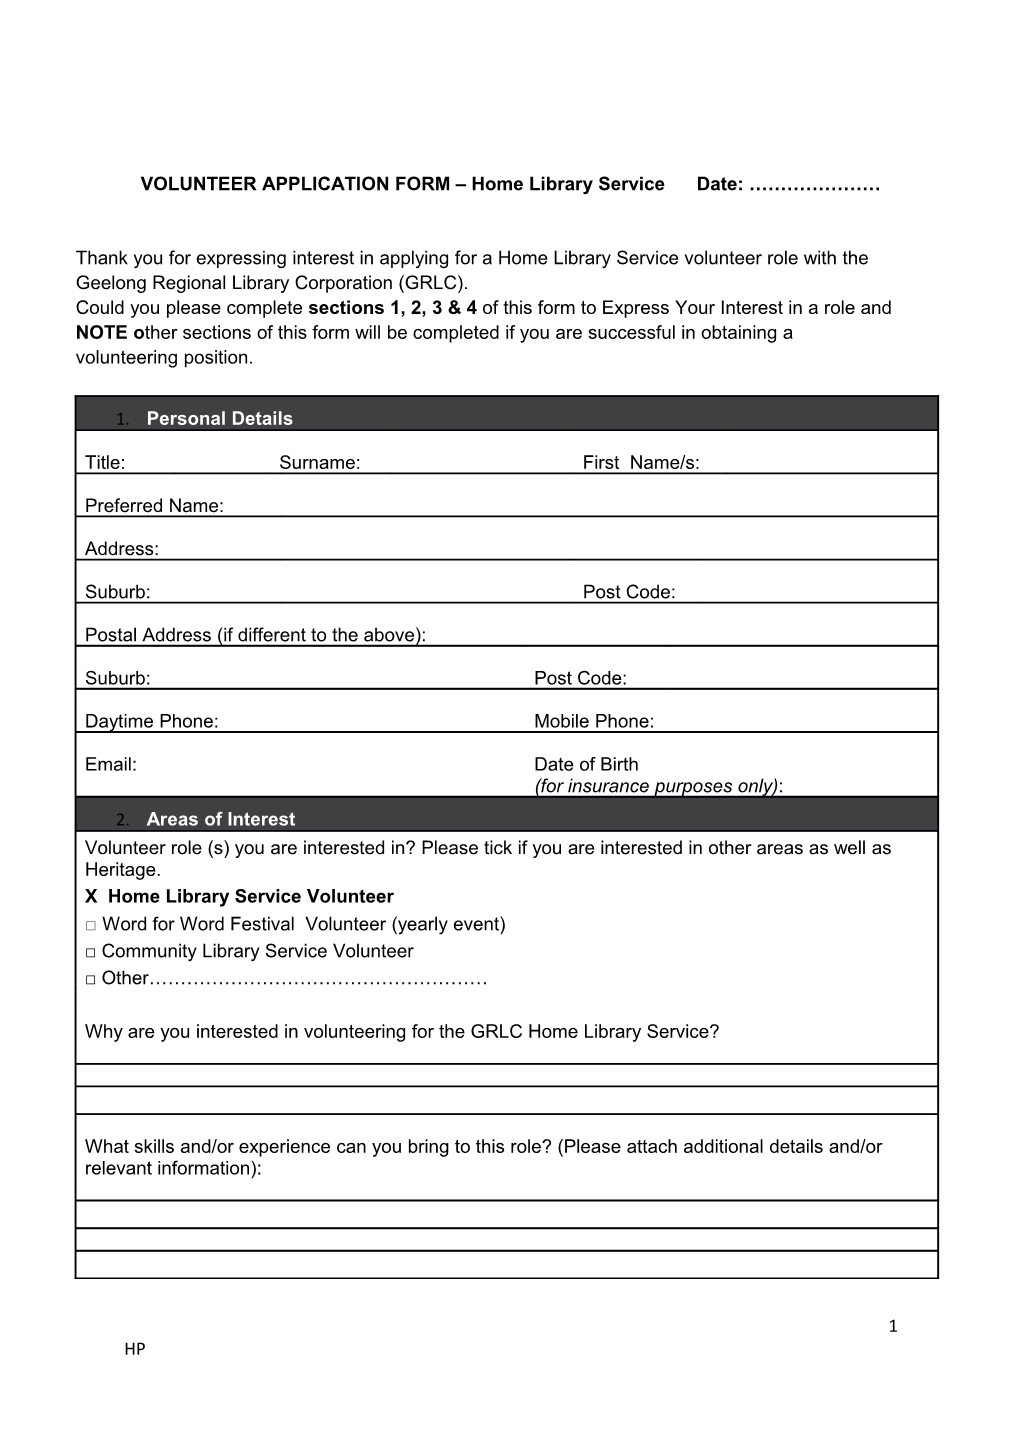 VOLUNTEER APPLICATION FORM Home Library Service Date